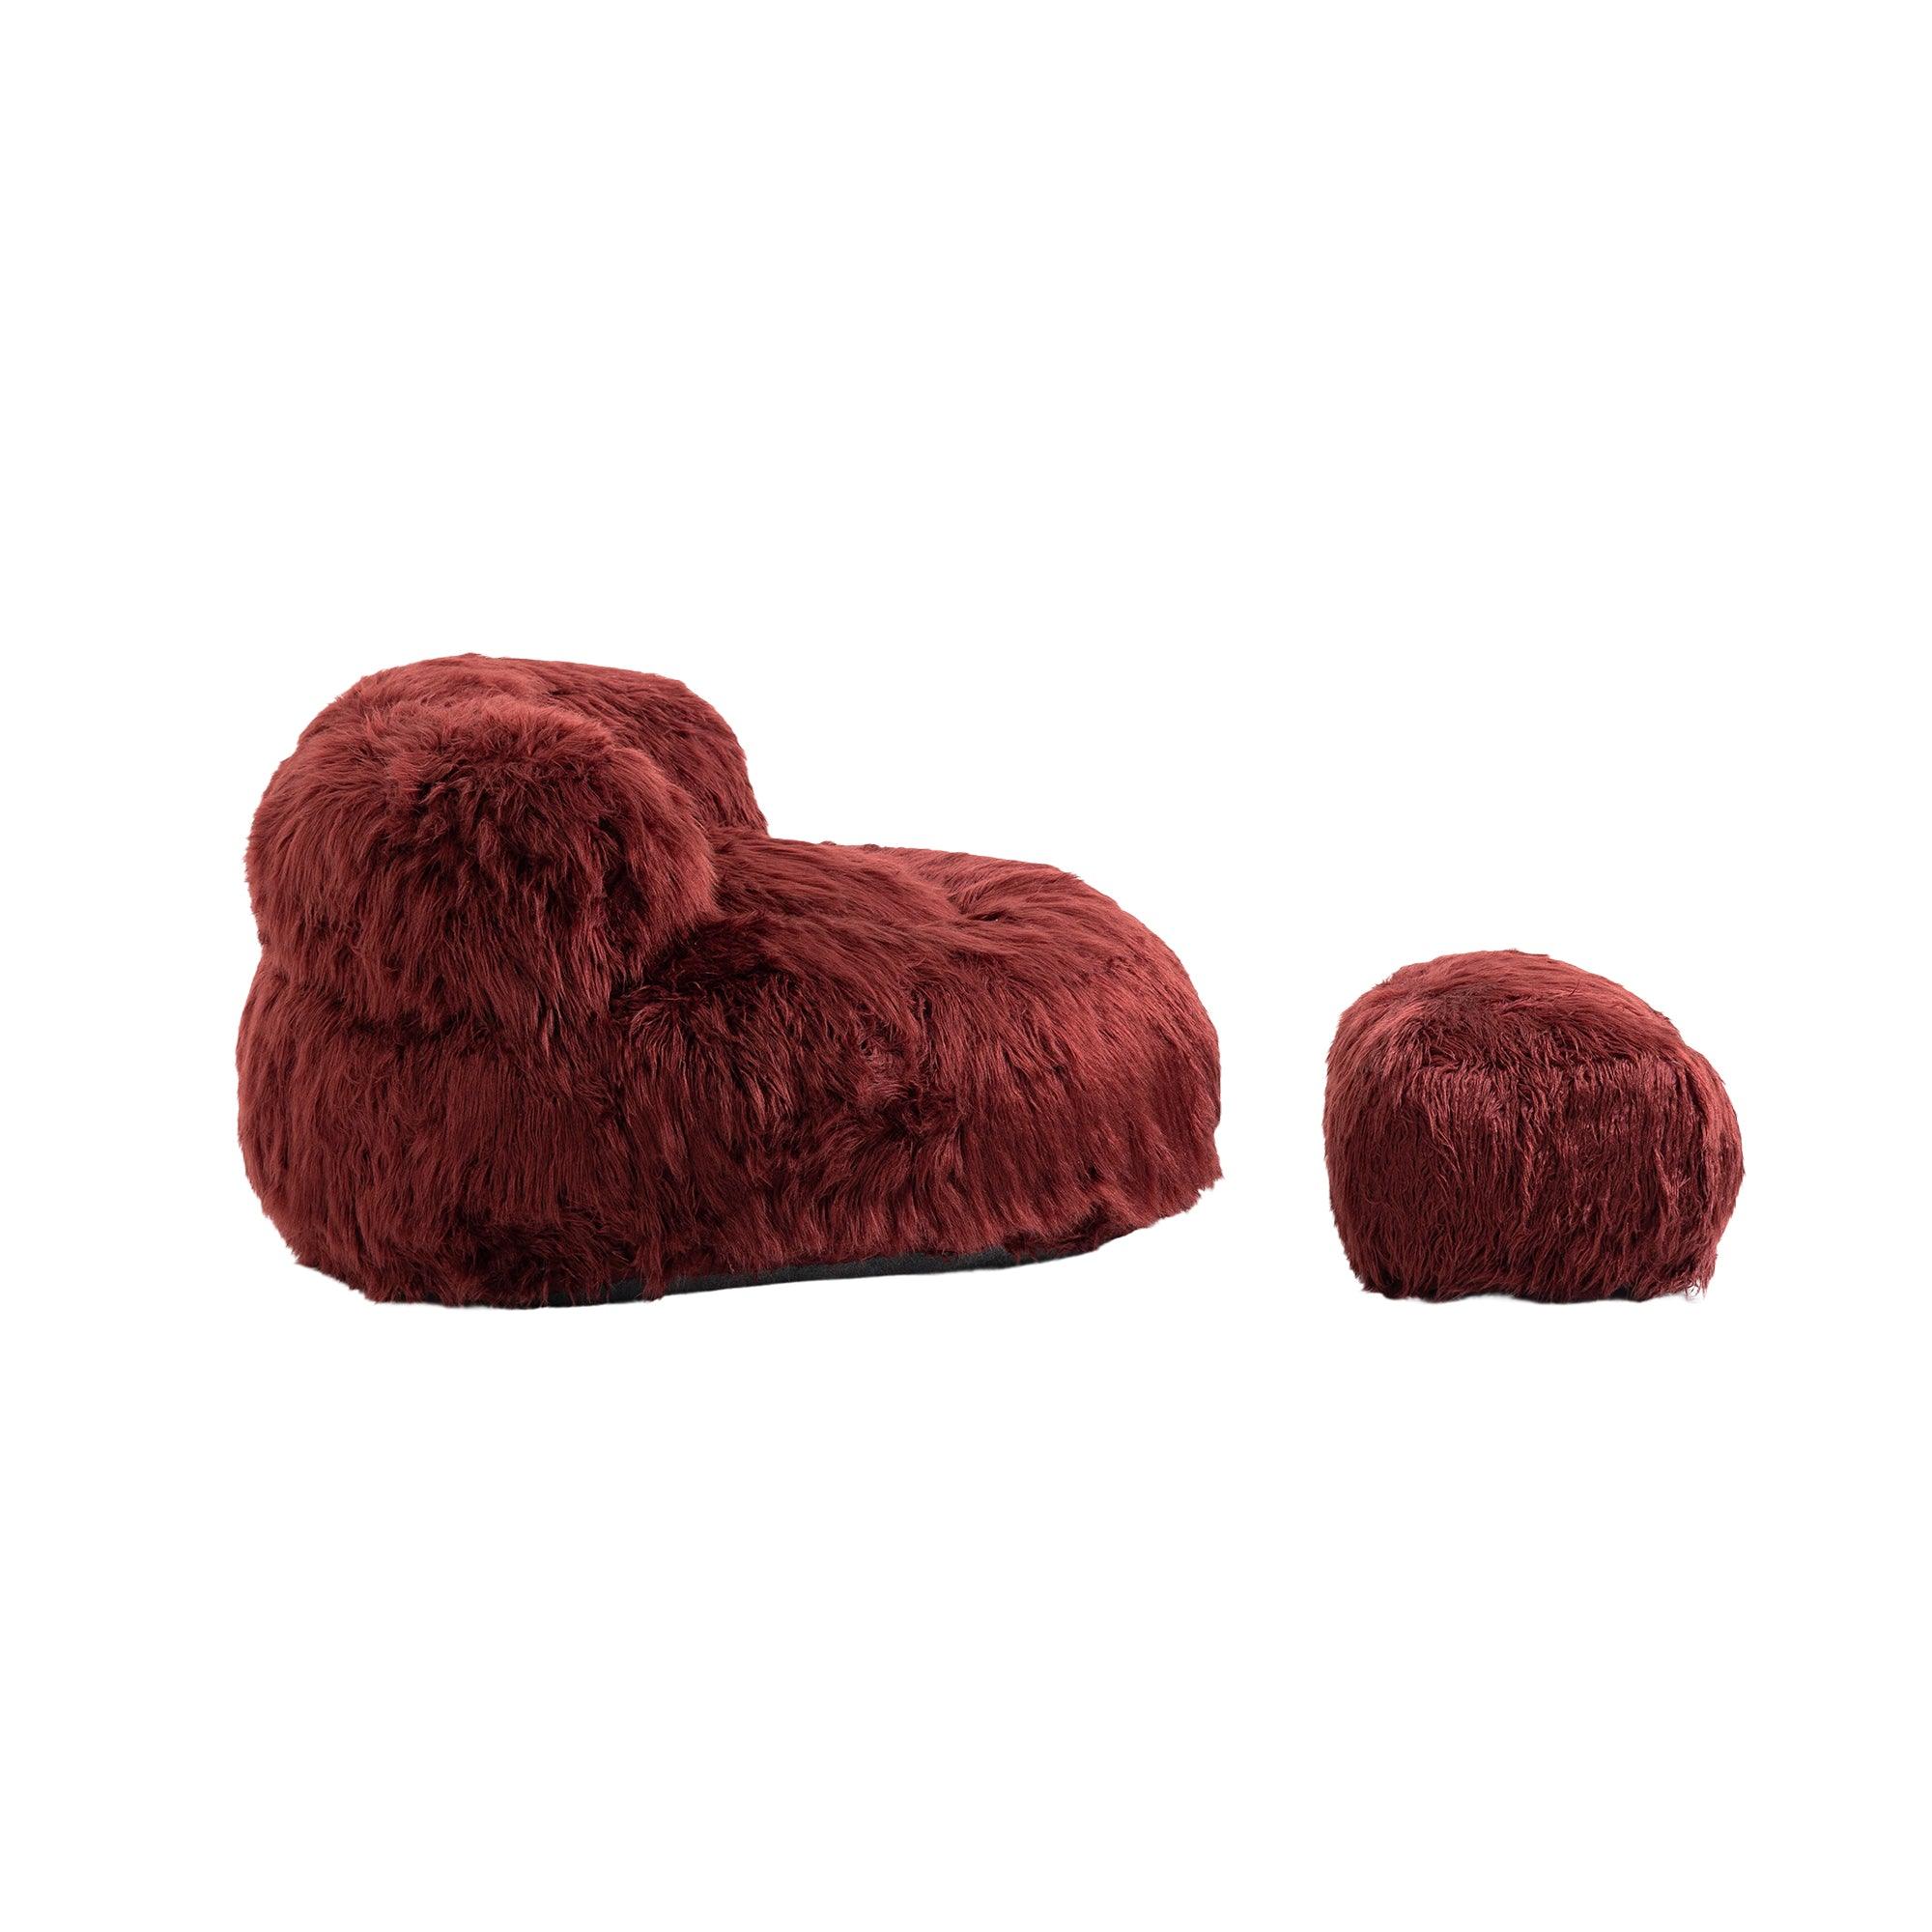 Gramanda Bean Bag Faux Fur Lazy Sofa + Footstool For Adults And Kids - Wine Red